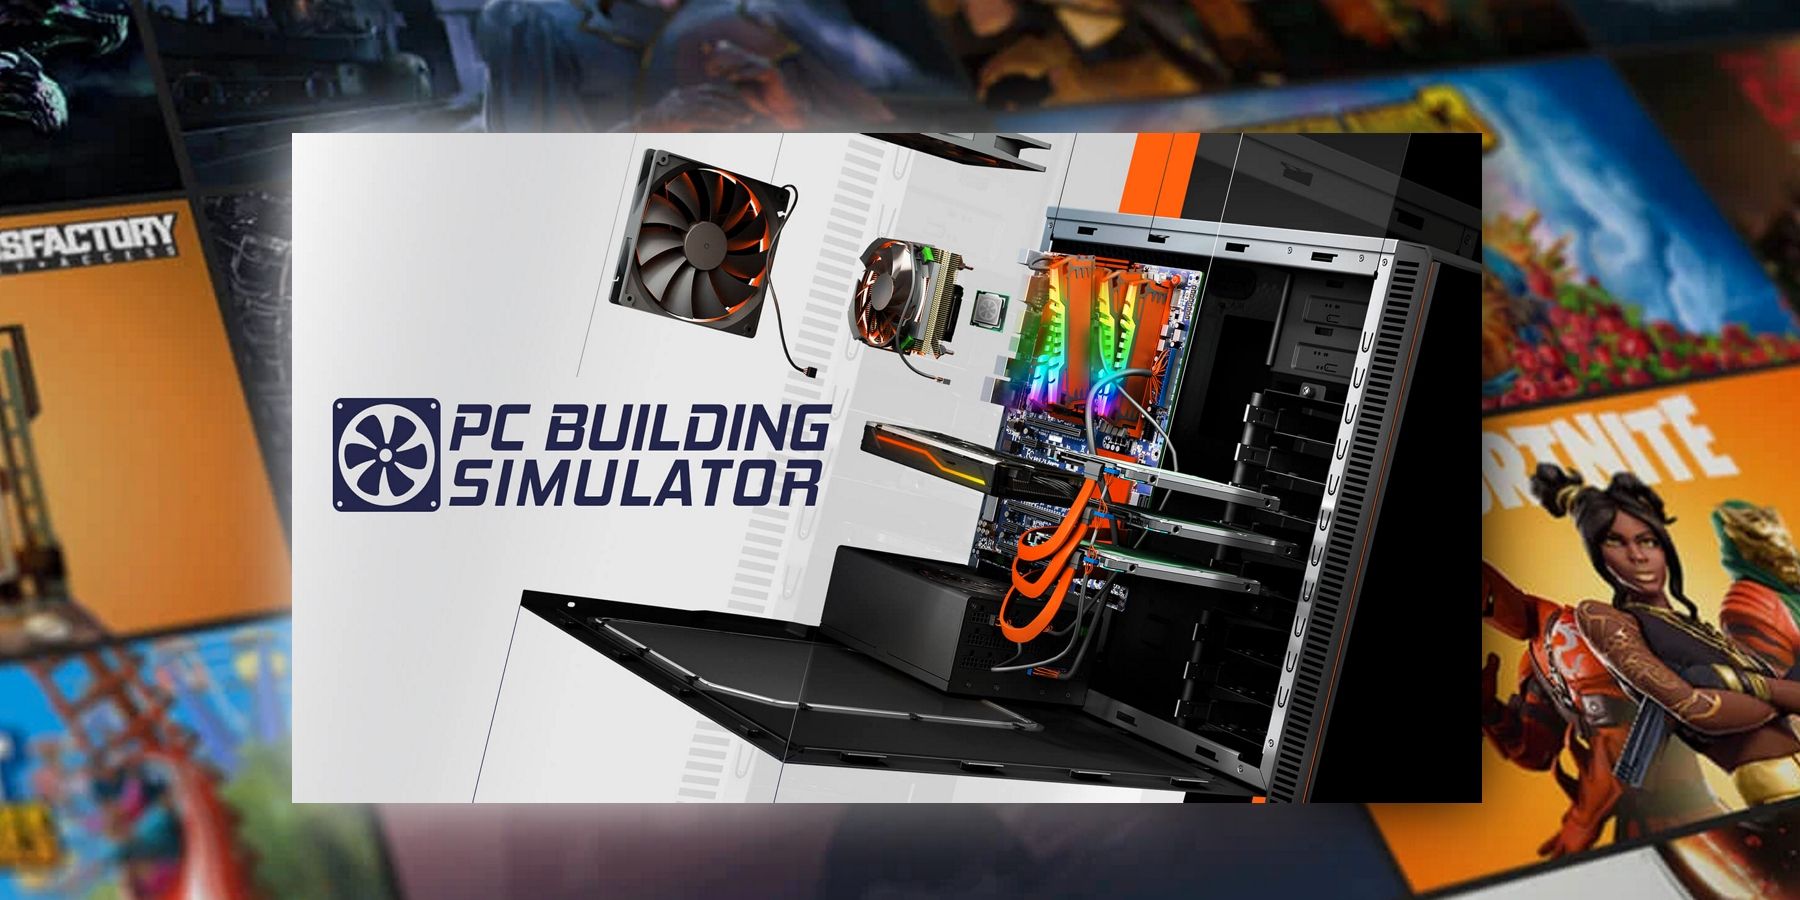 Epic Games Store Free Game PC Building Simulator Explained